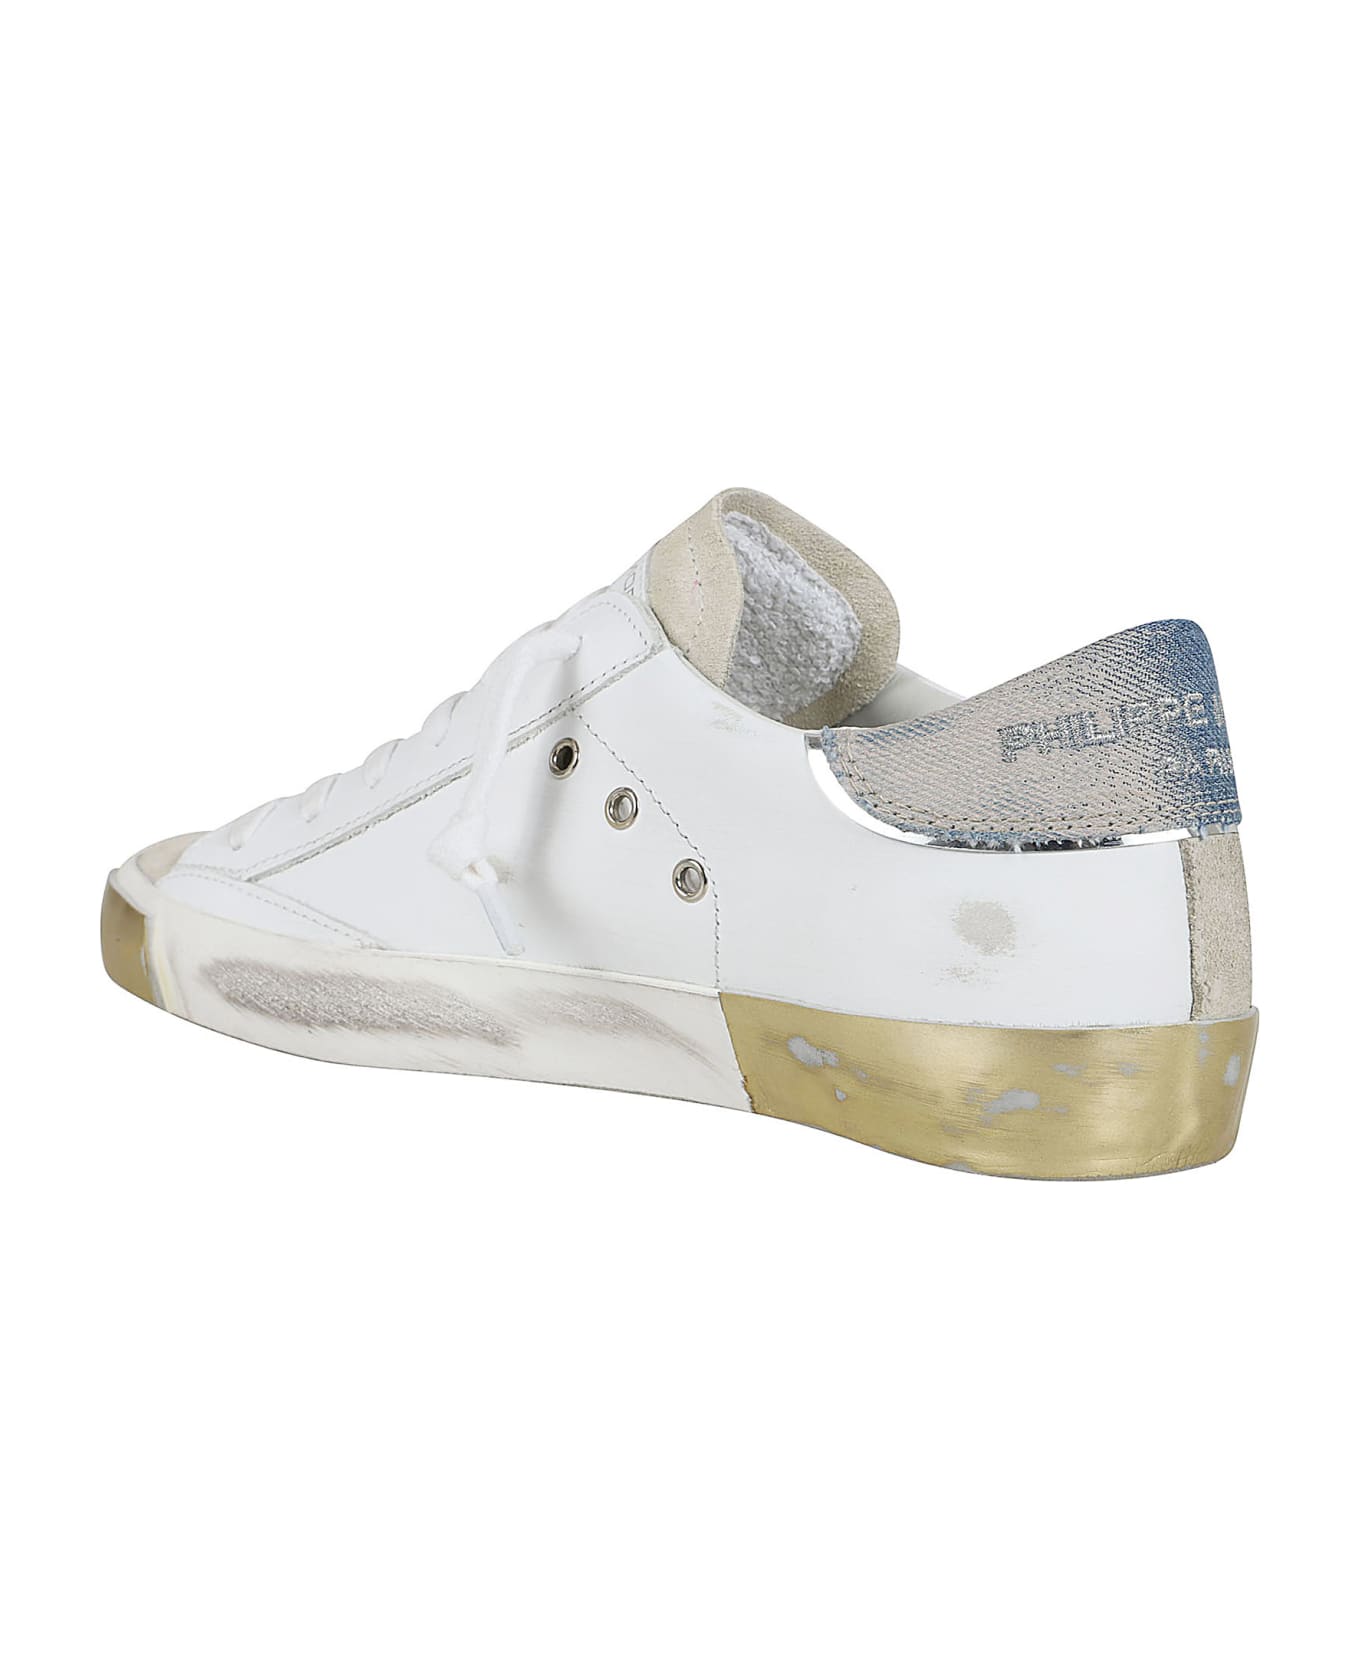 Philippe Model Prsx Low Woman - golden goose superstar low top leather sneakers item